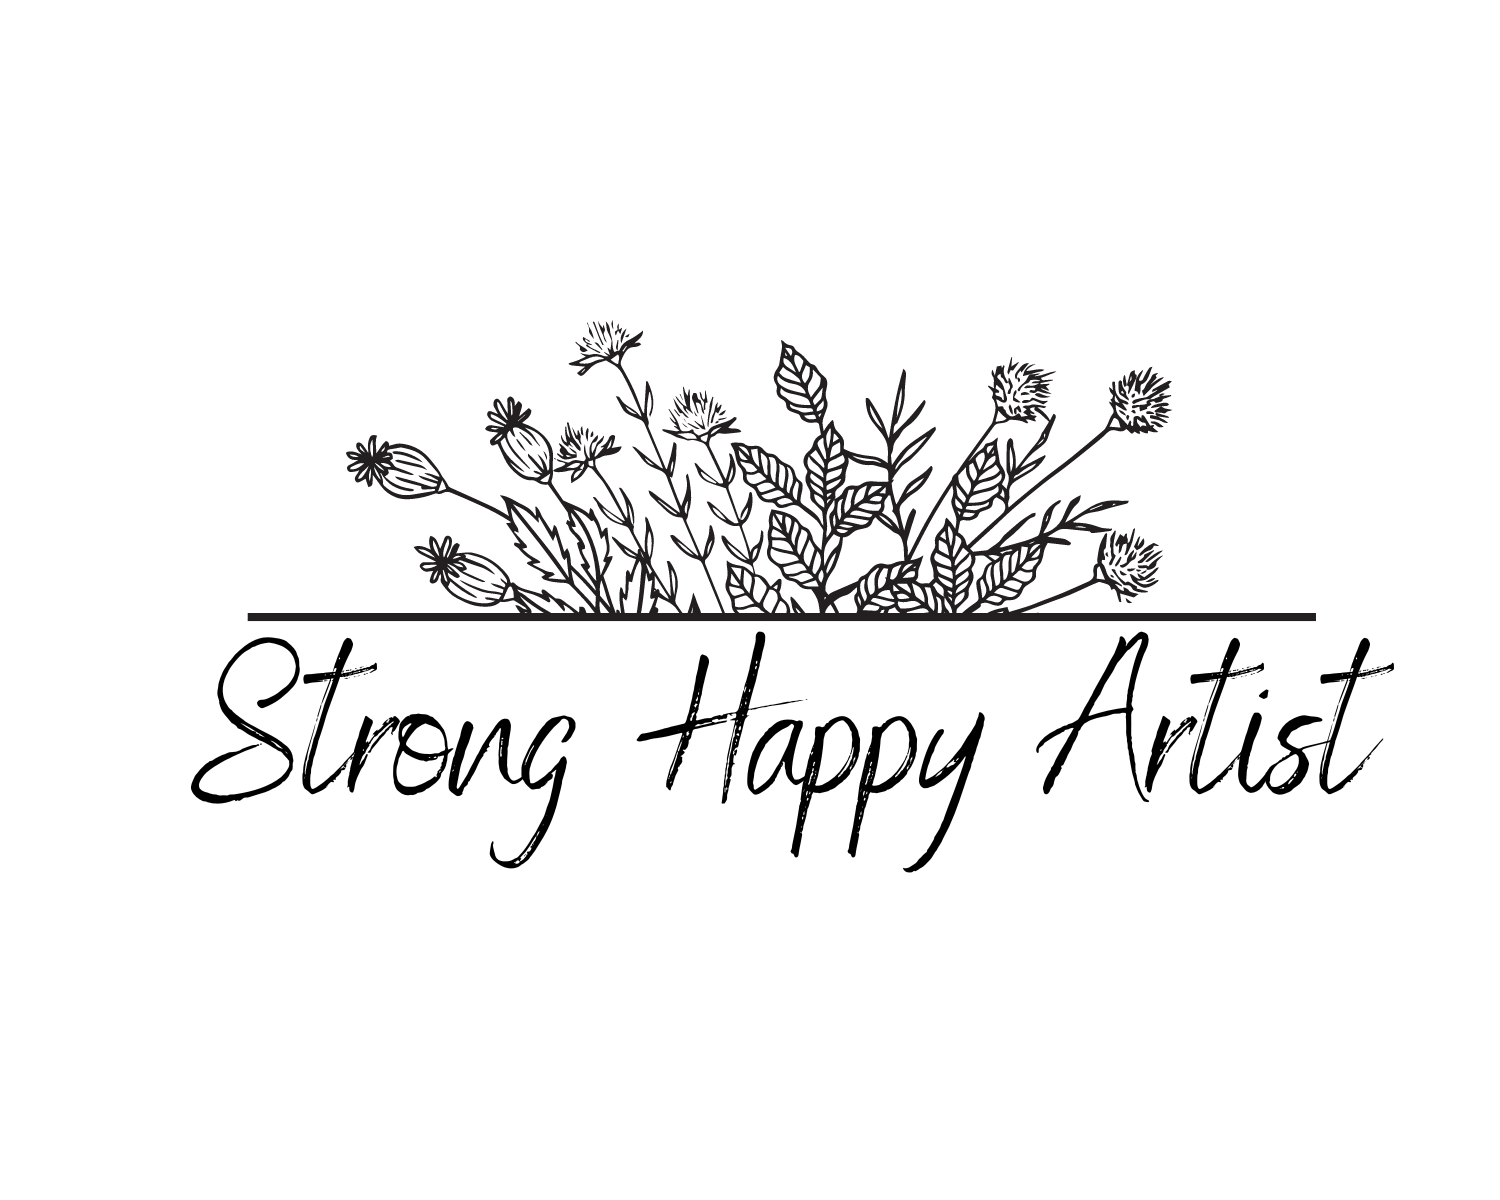 The Strong Happy Artist